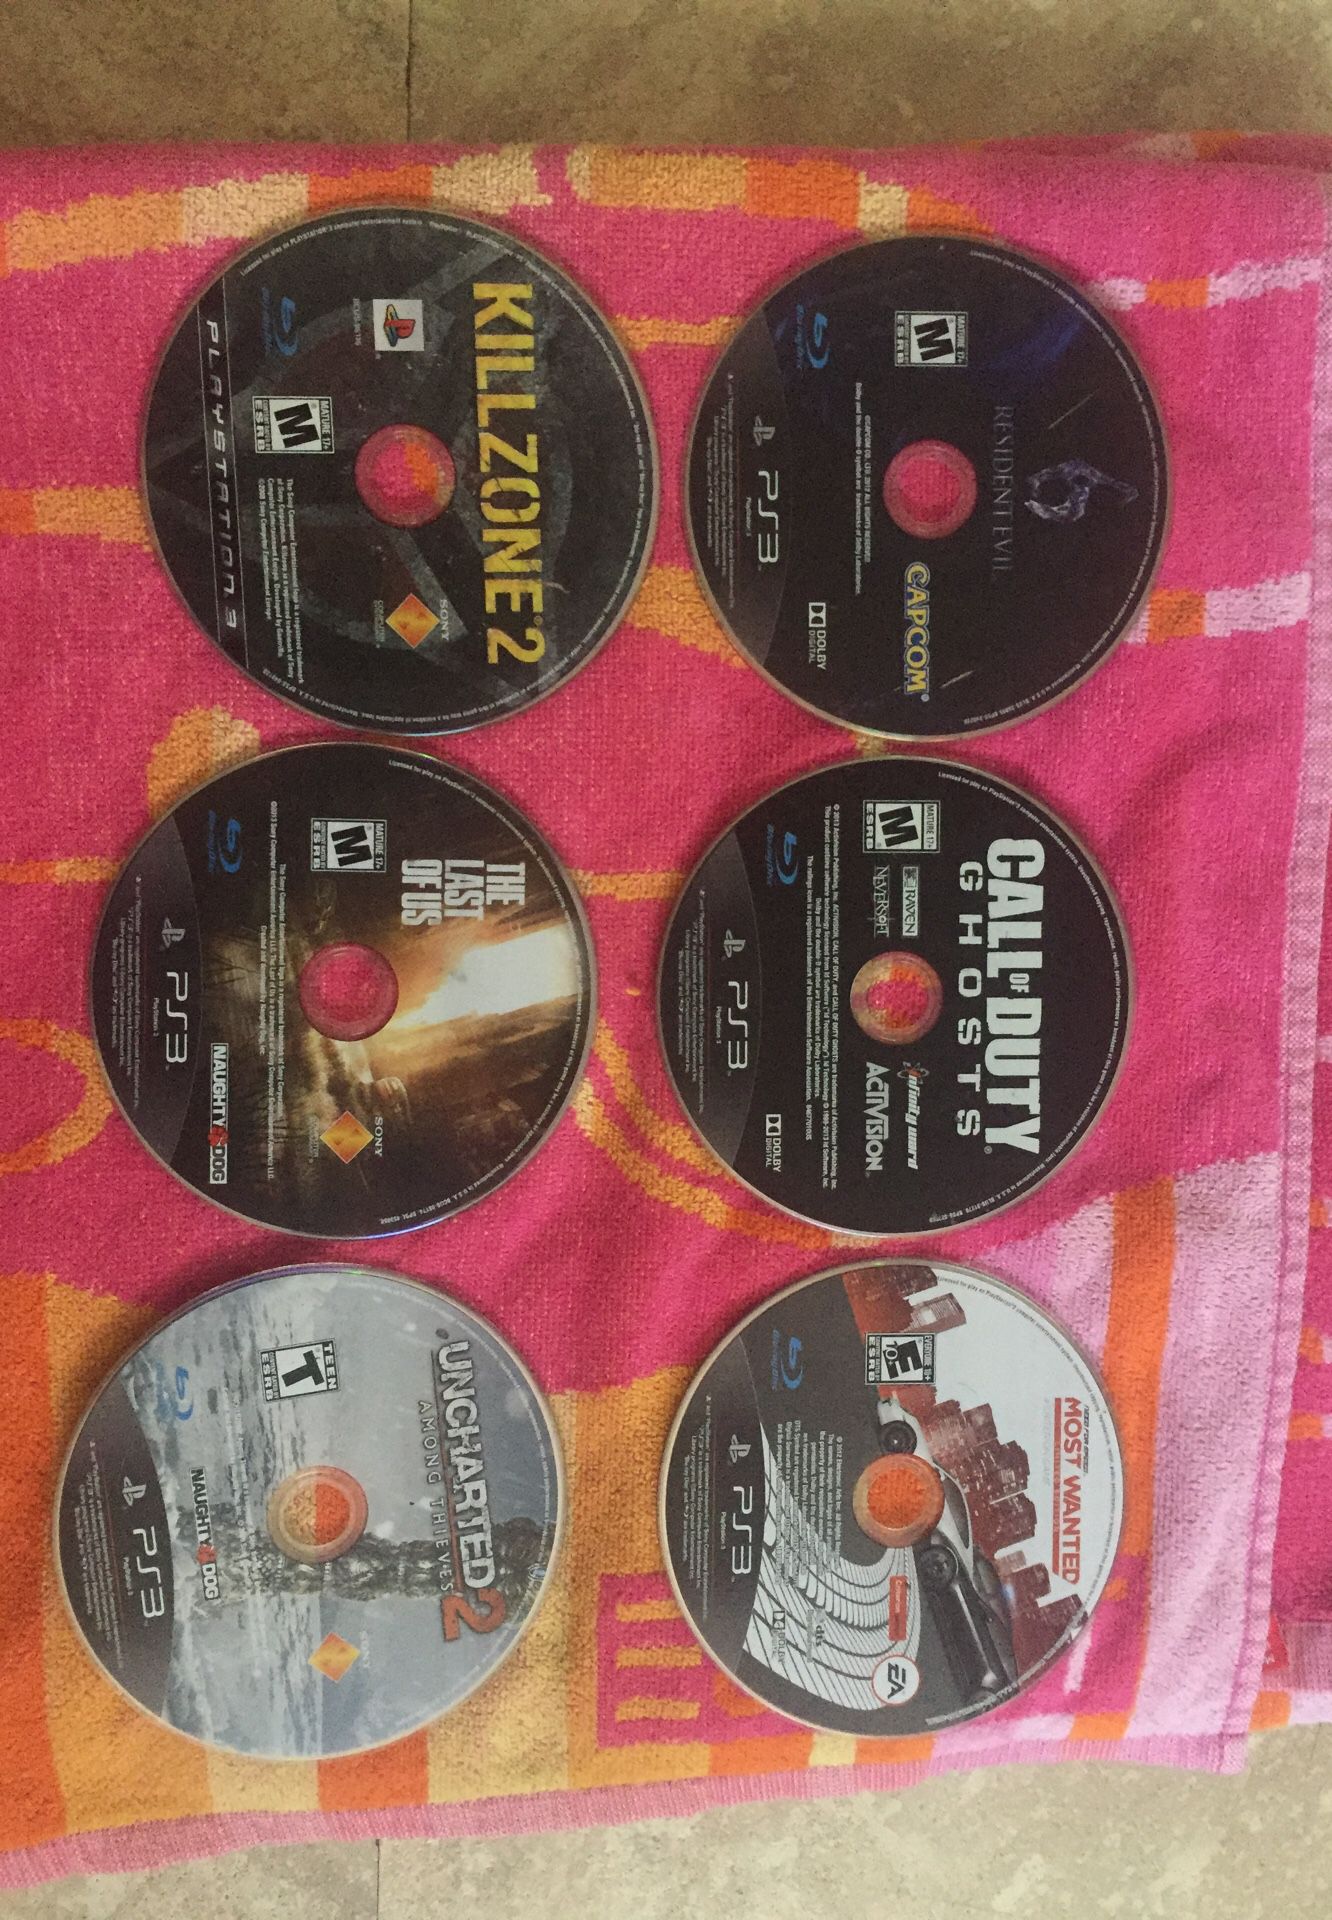 PS3 all games for $10.00